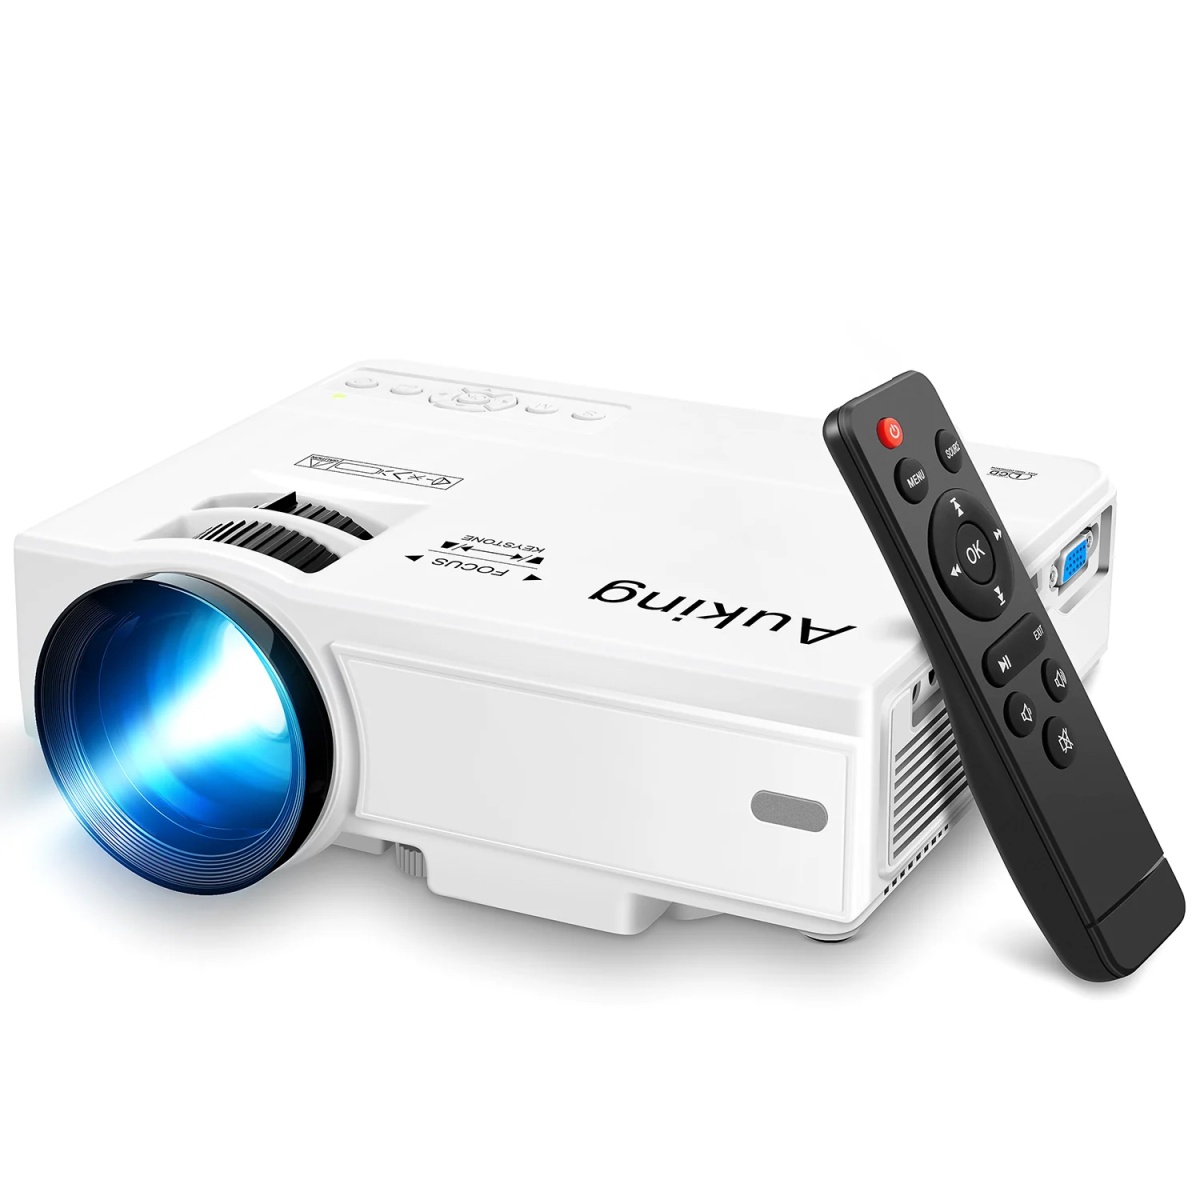 auking mini 1080p projector review